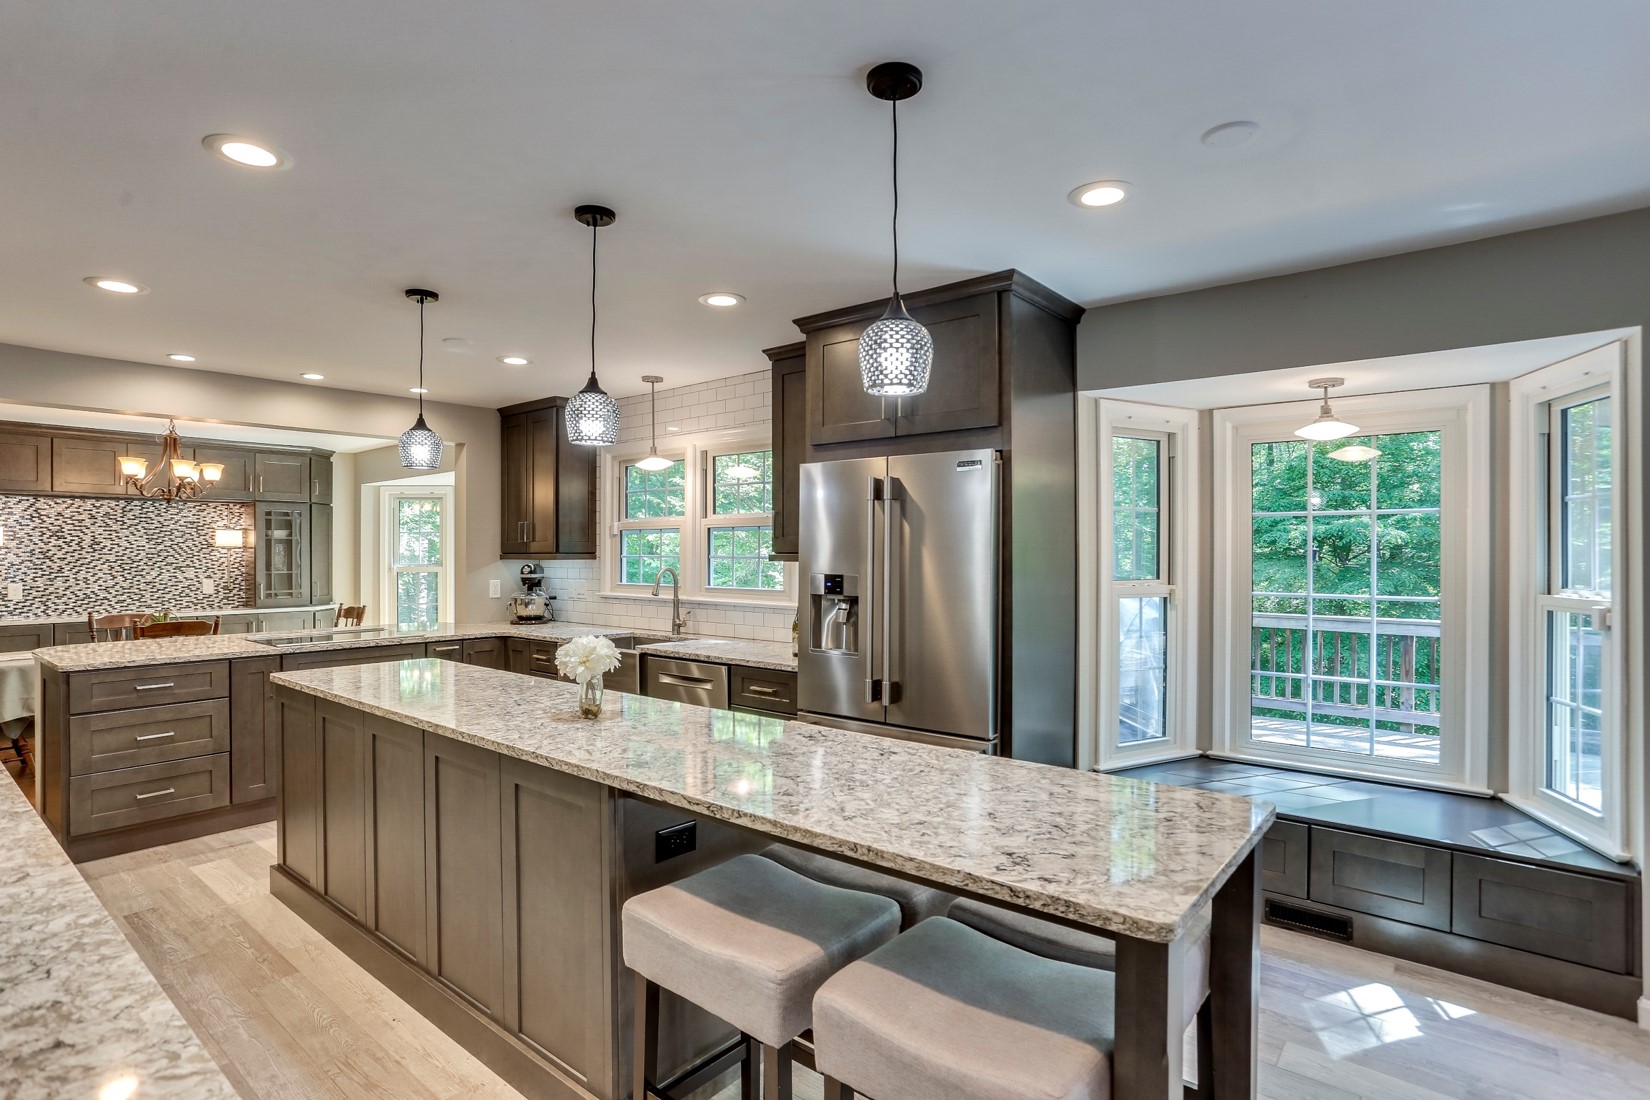 Significance Of Communication With Your Kitchen Remodeling Team